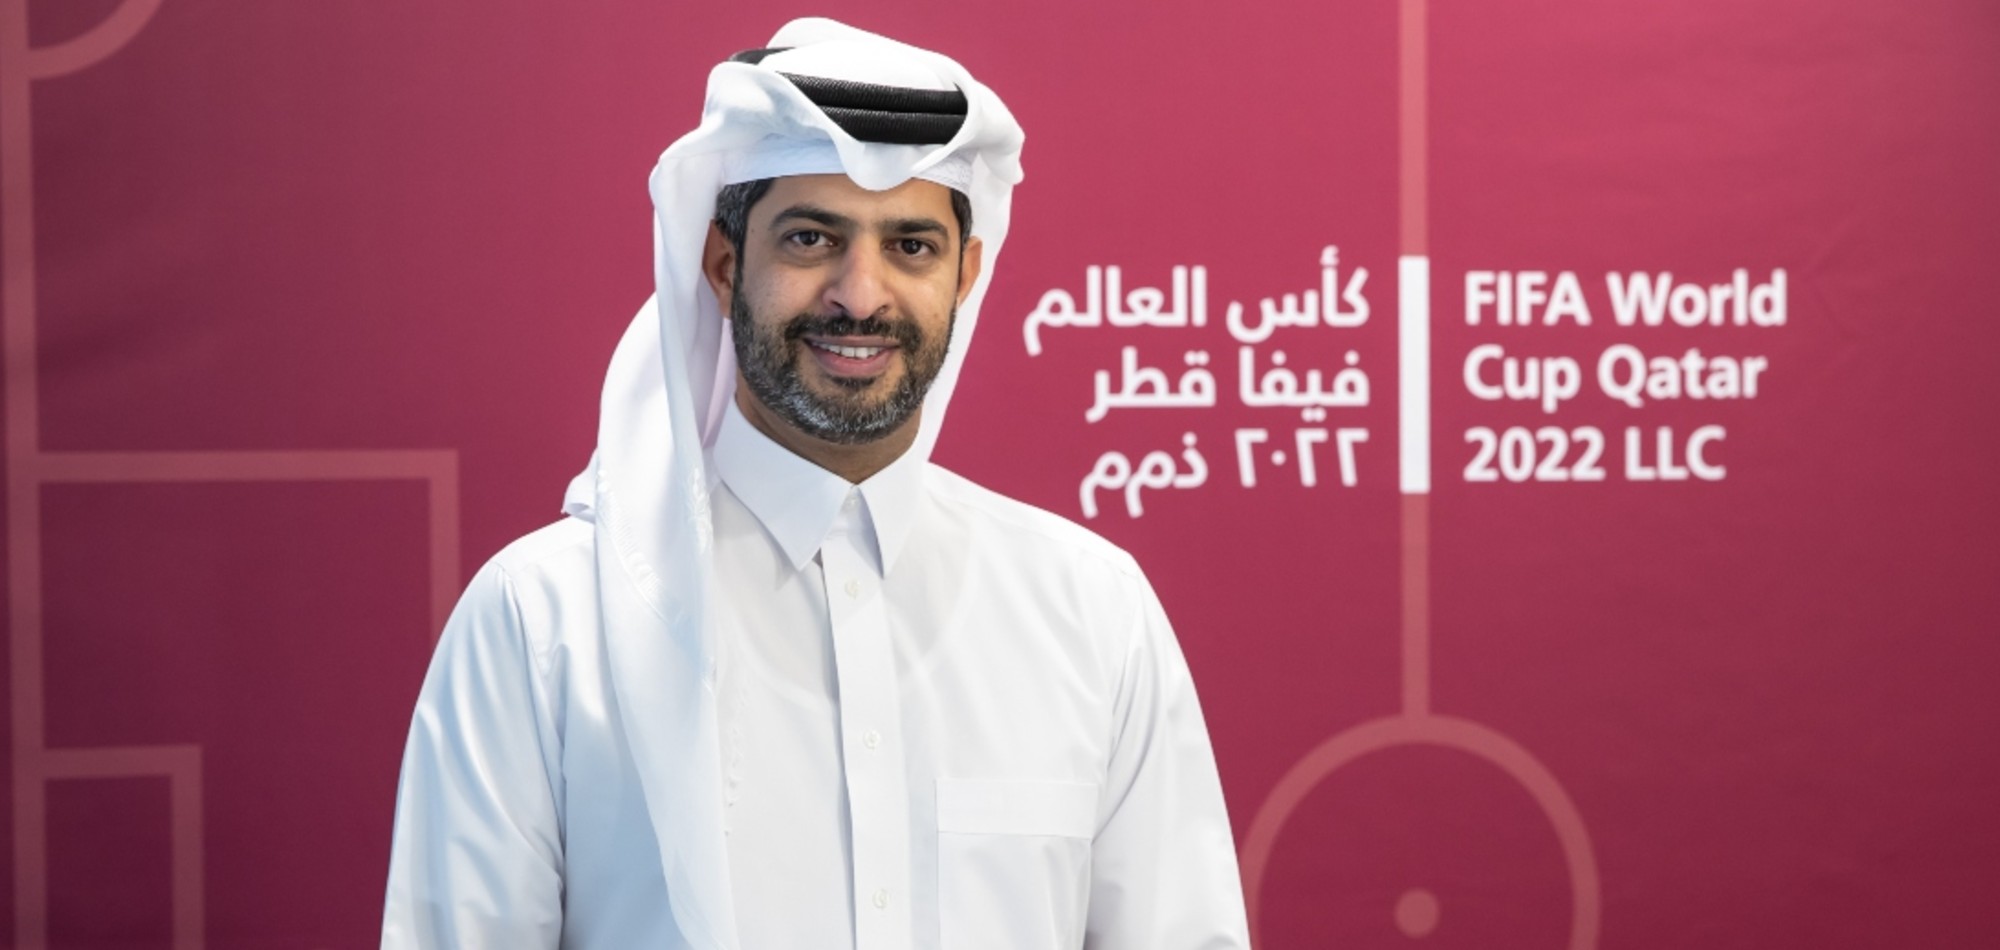 FIFA World Cup Qatar 2022 will offer unmatched fan experience: CEO Nasser Al Khater